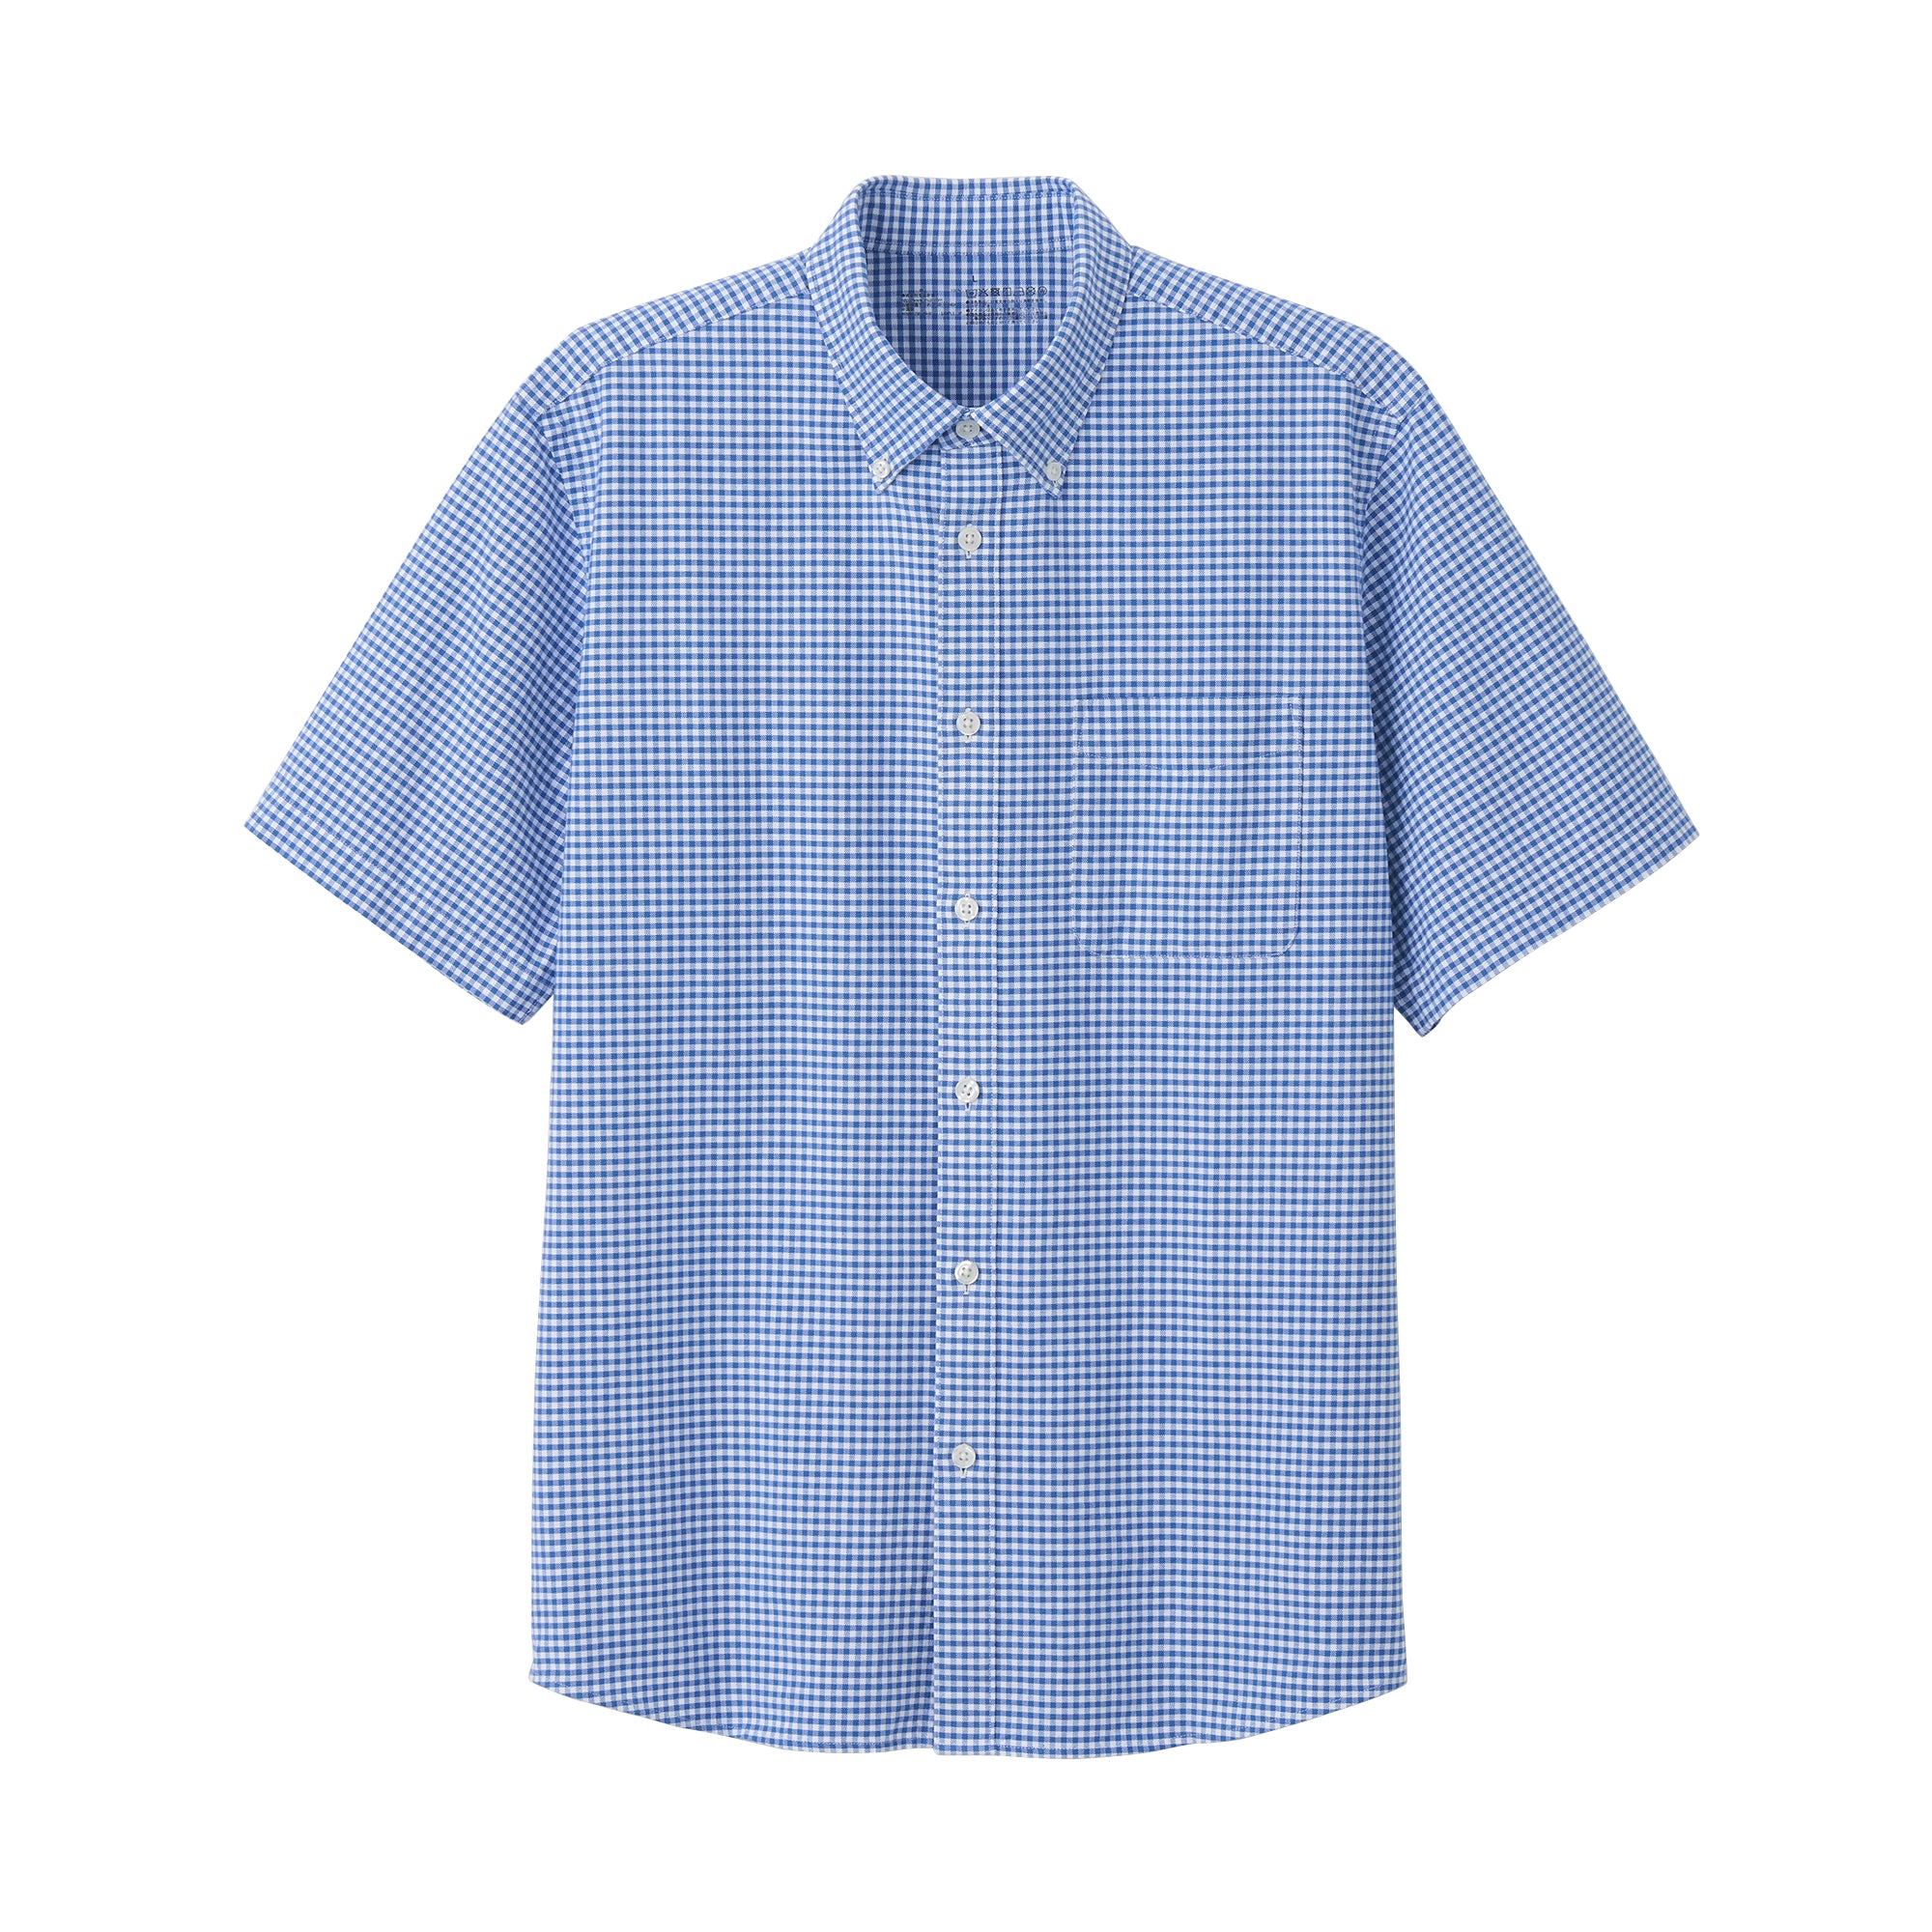 Men's Washed Oxford Button Down Patterned Short Sleeve Shirt